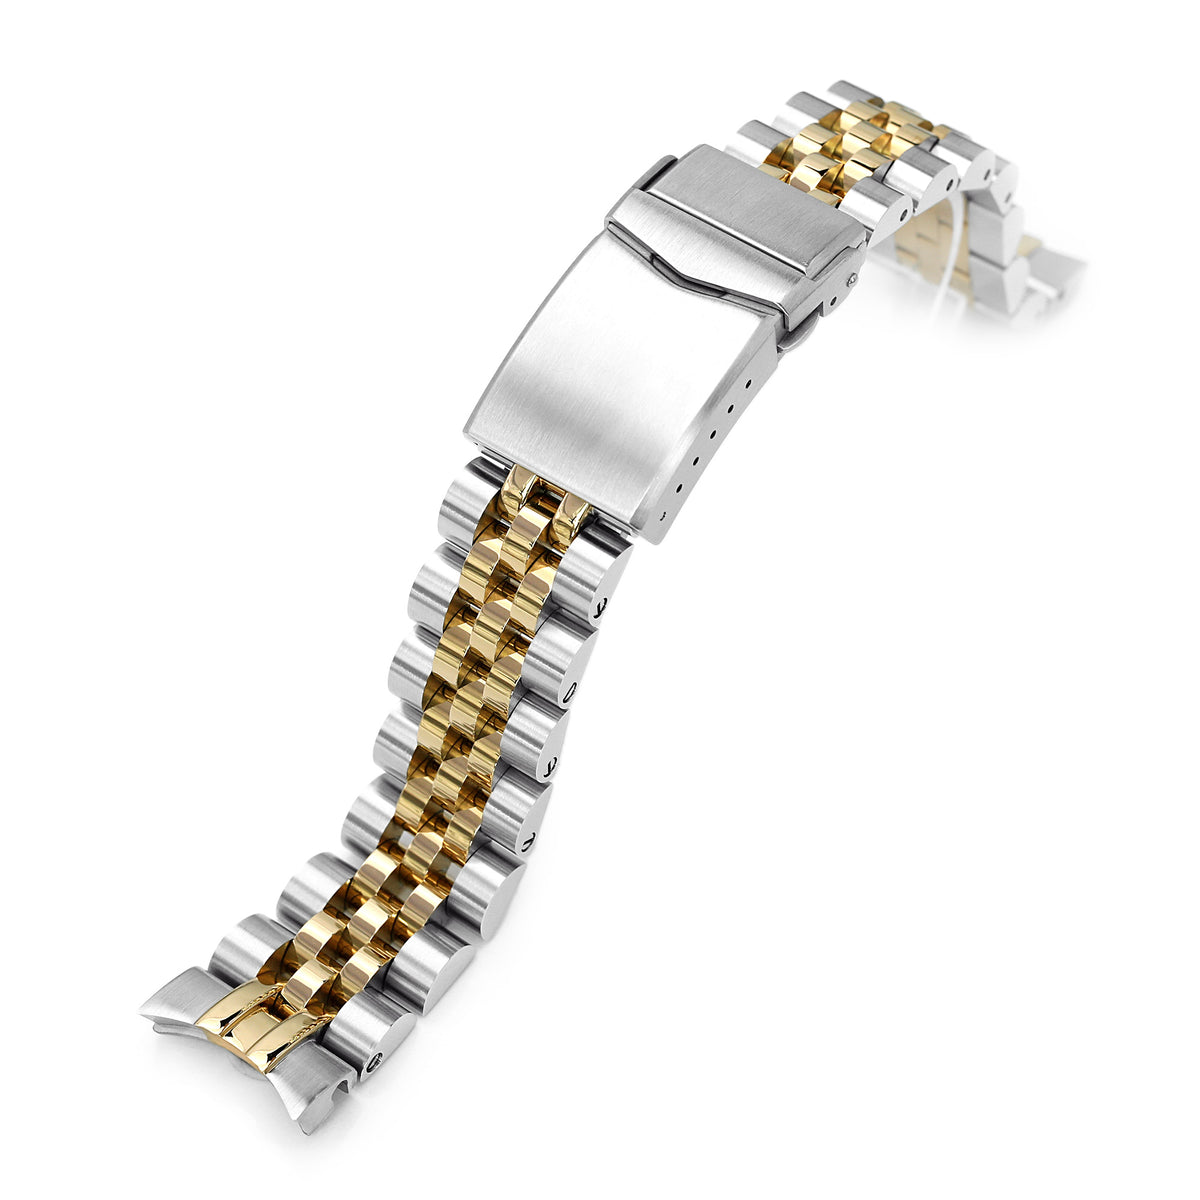 20mm Angus-J Louis JUB Watch Band for Seiko Alpinist SARB017 (or Hamilton K.), 316L Stainless Steel Brushed with IP Gold Center V-Clasp